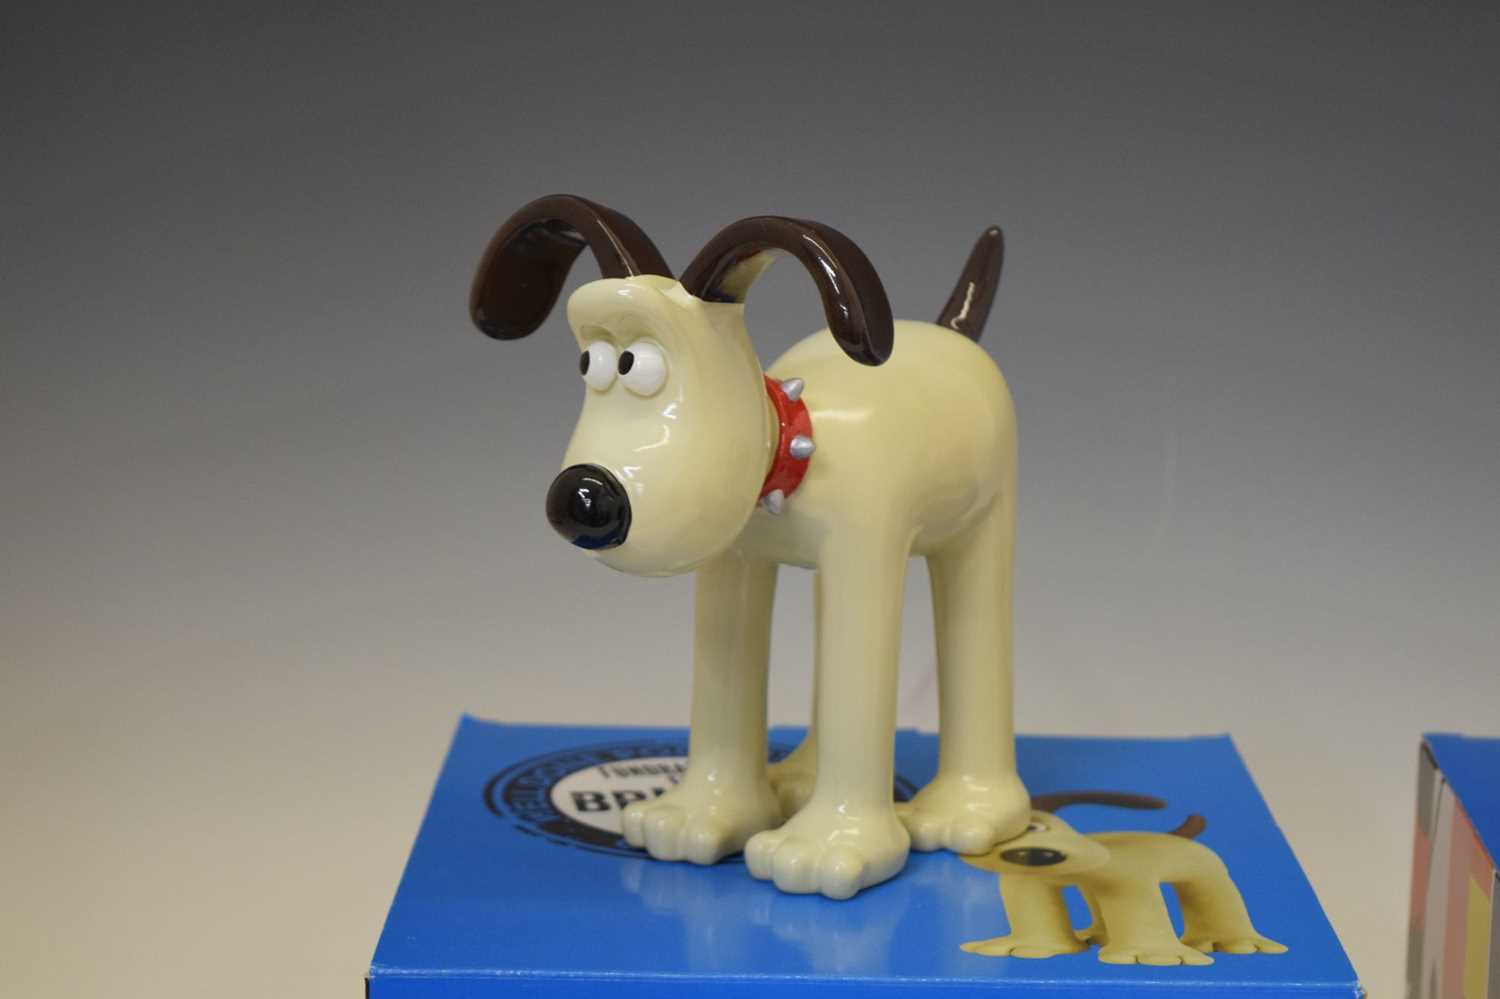 Aardman/Wallace and Gromit - 'Gromit Unleashed' figures - Image 3 of 8